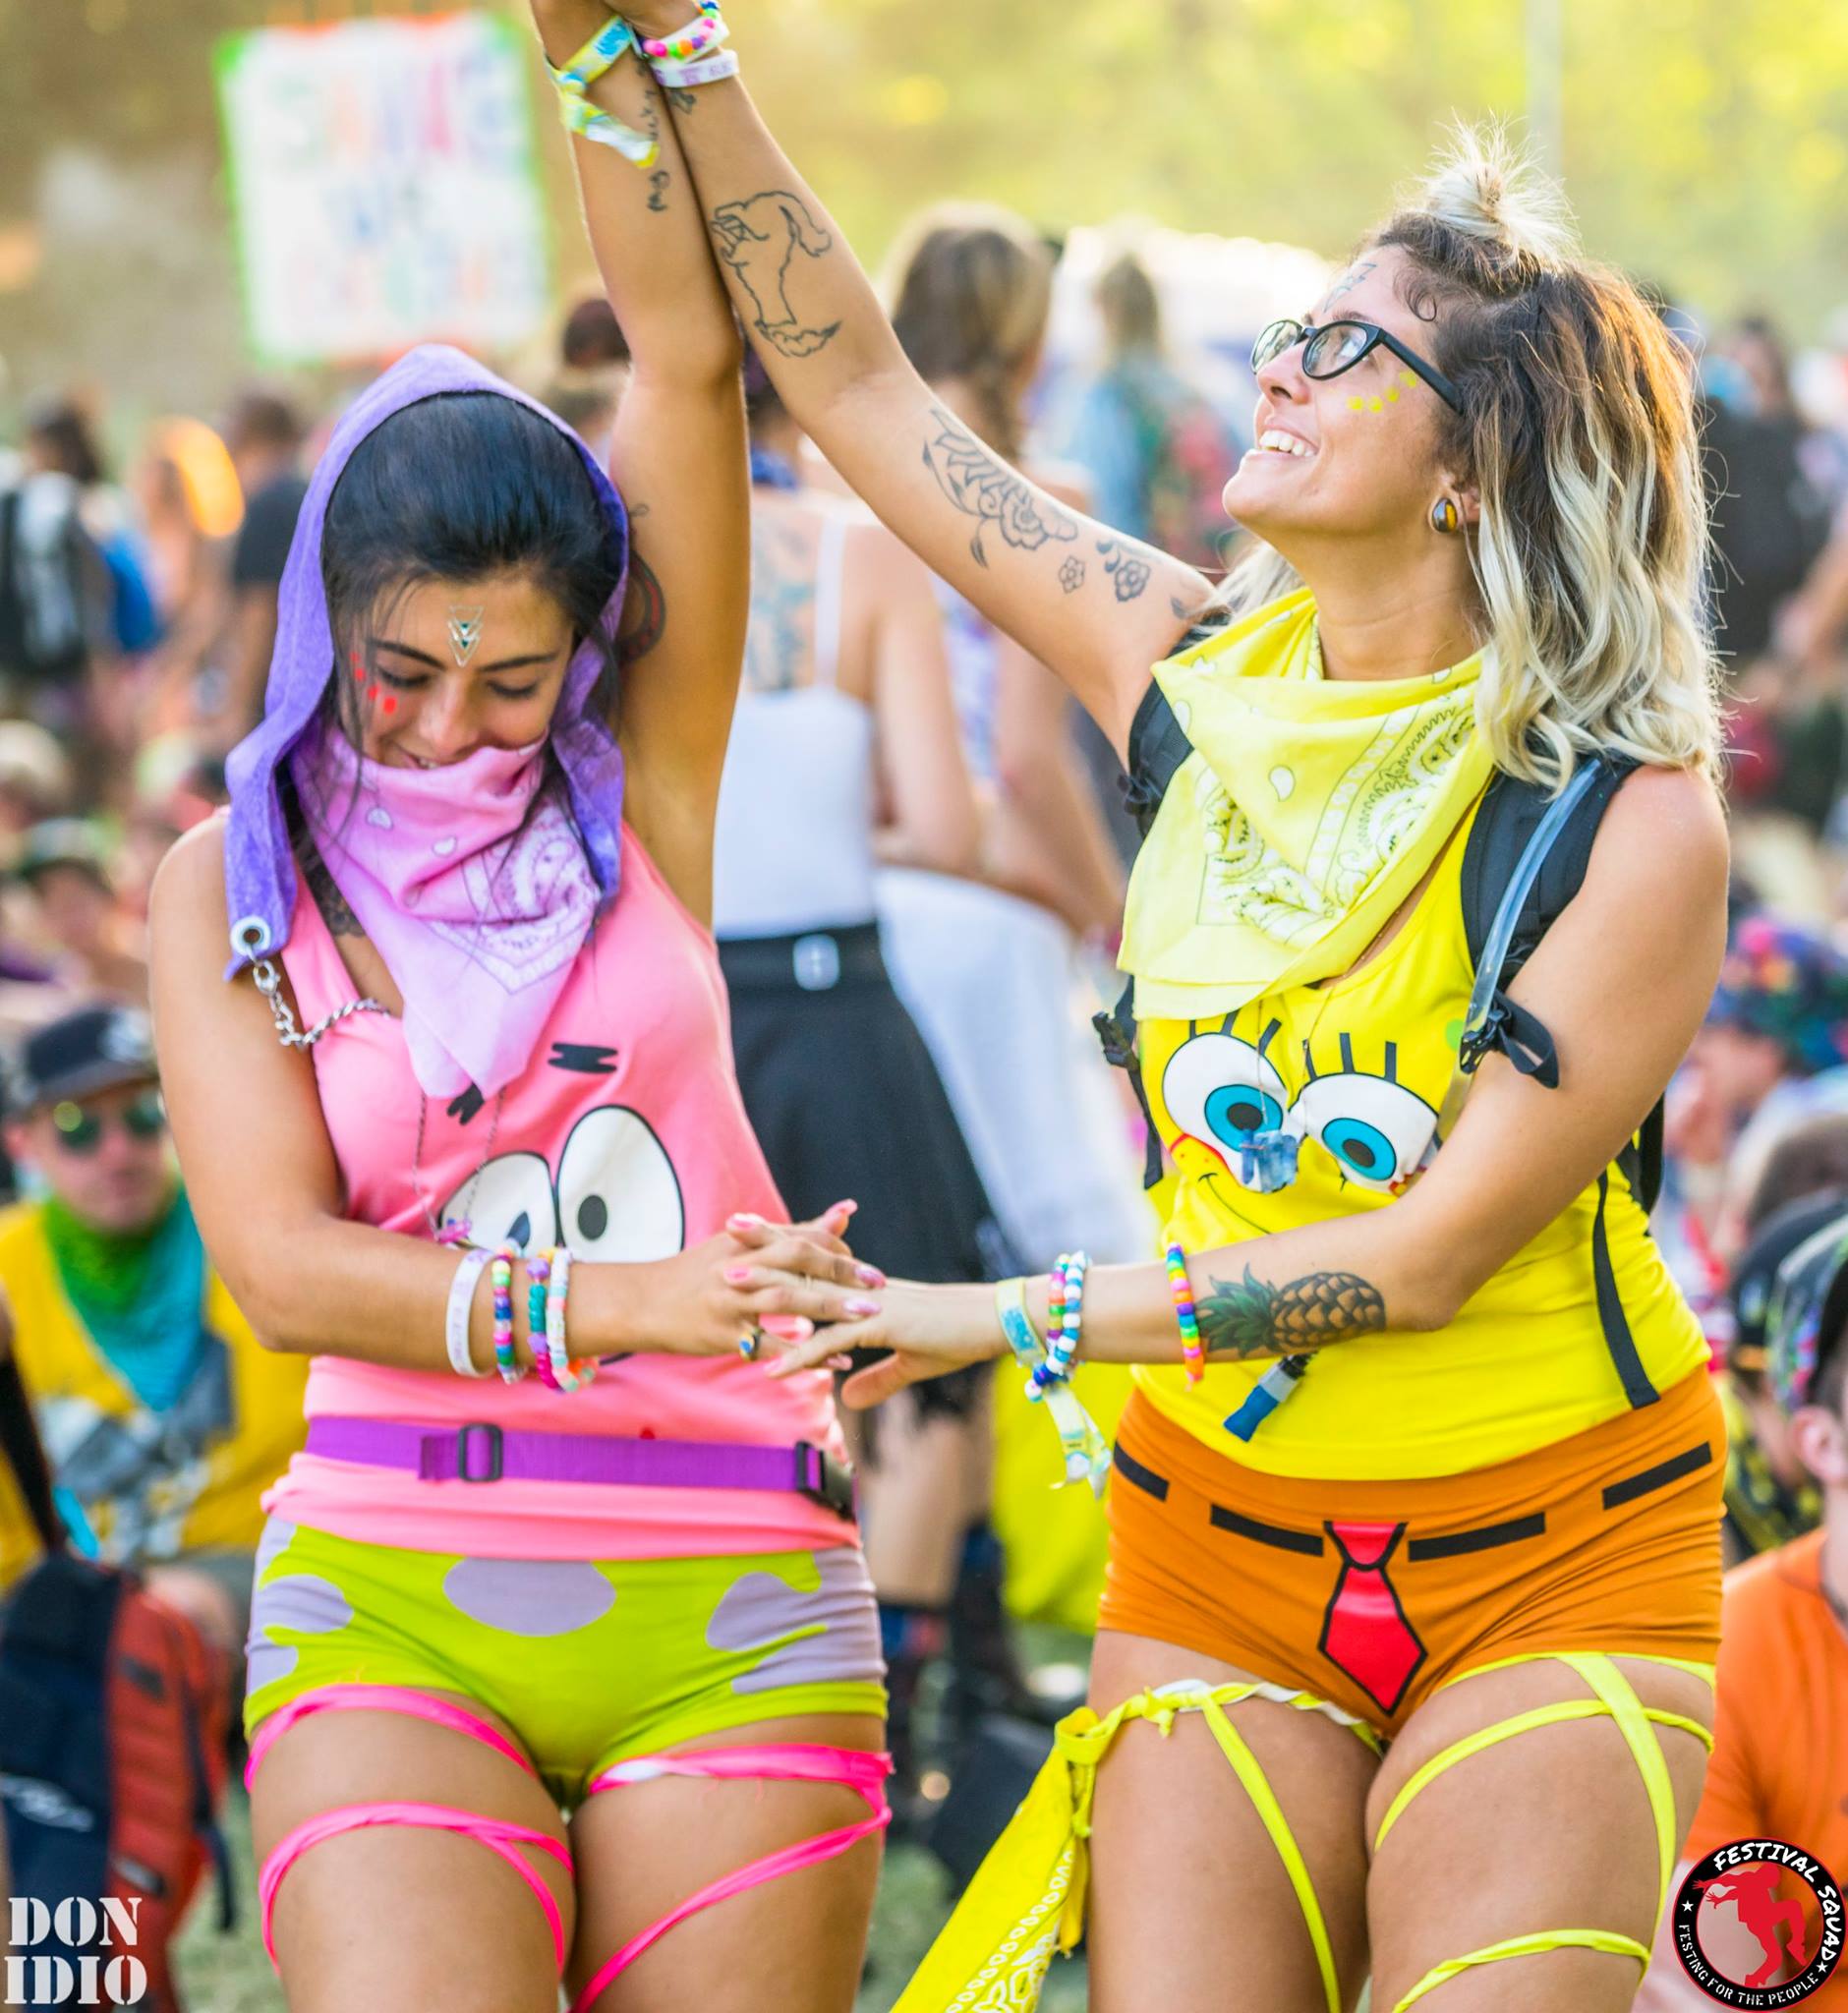 EDC Orlando What To Wear, What To Wear Festival Squad